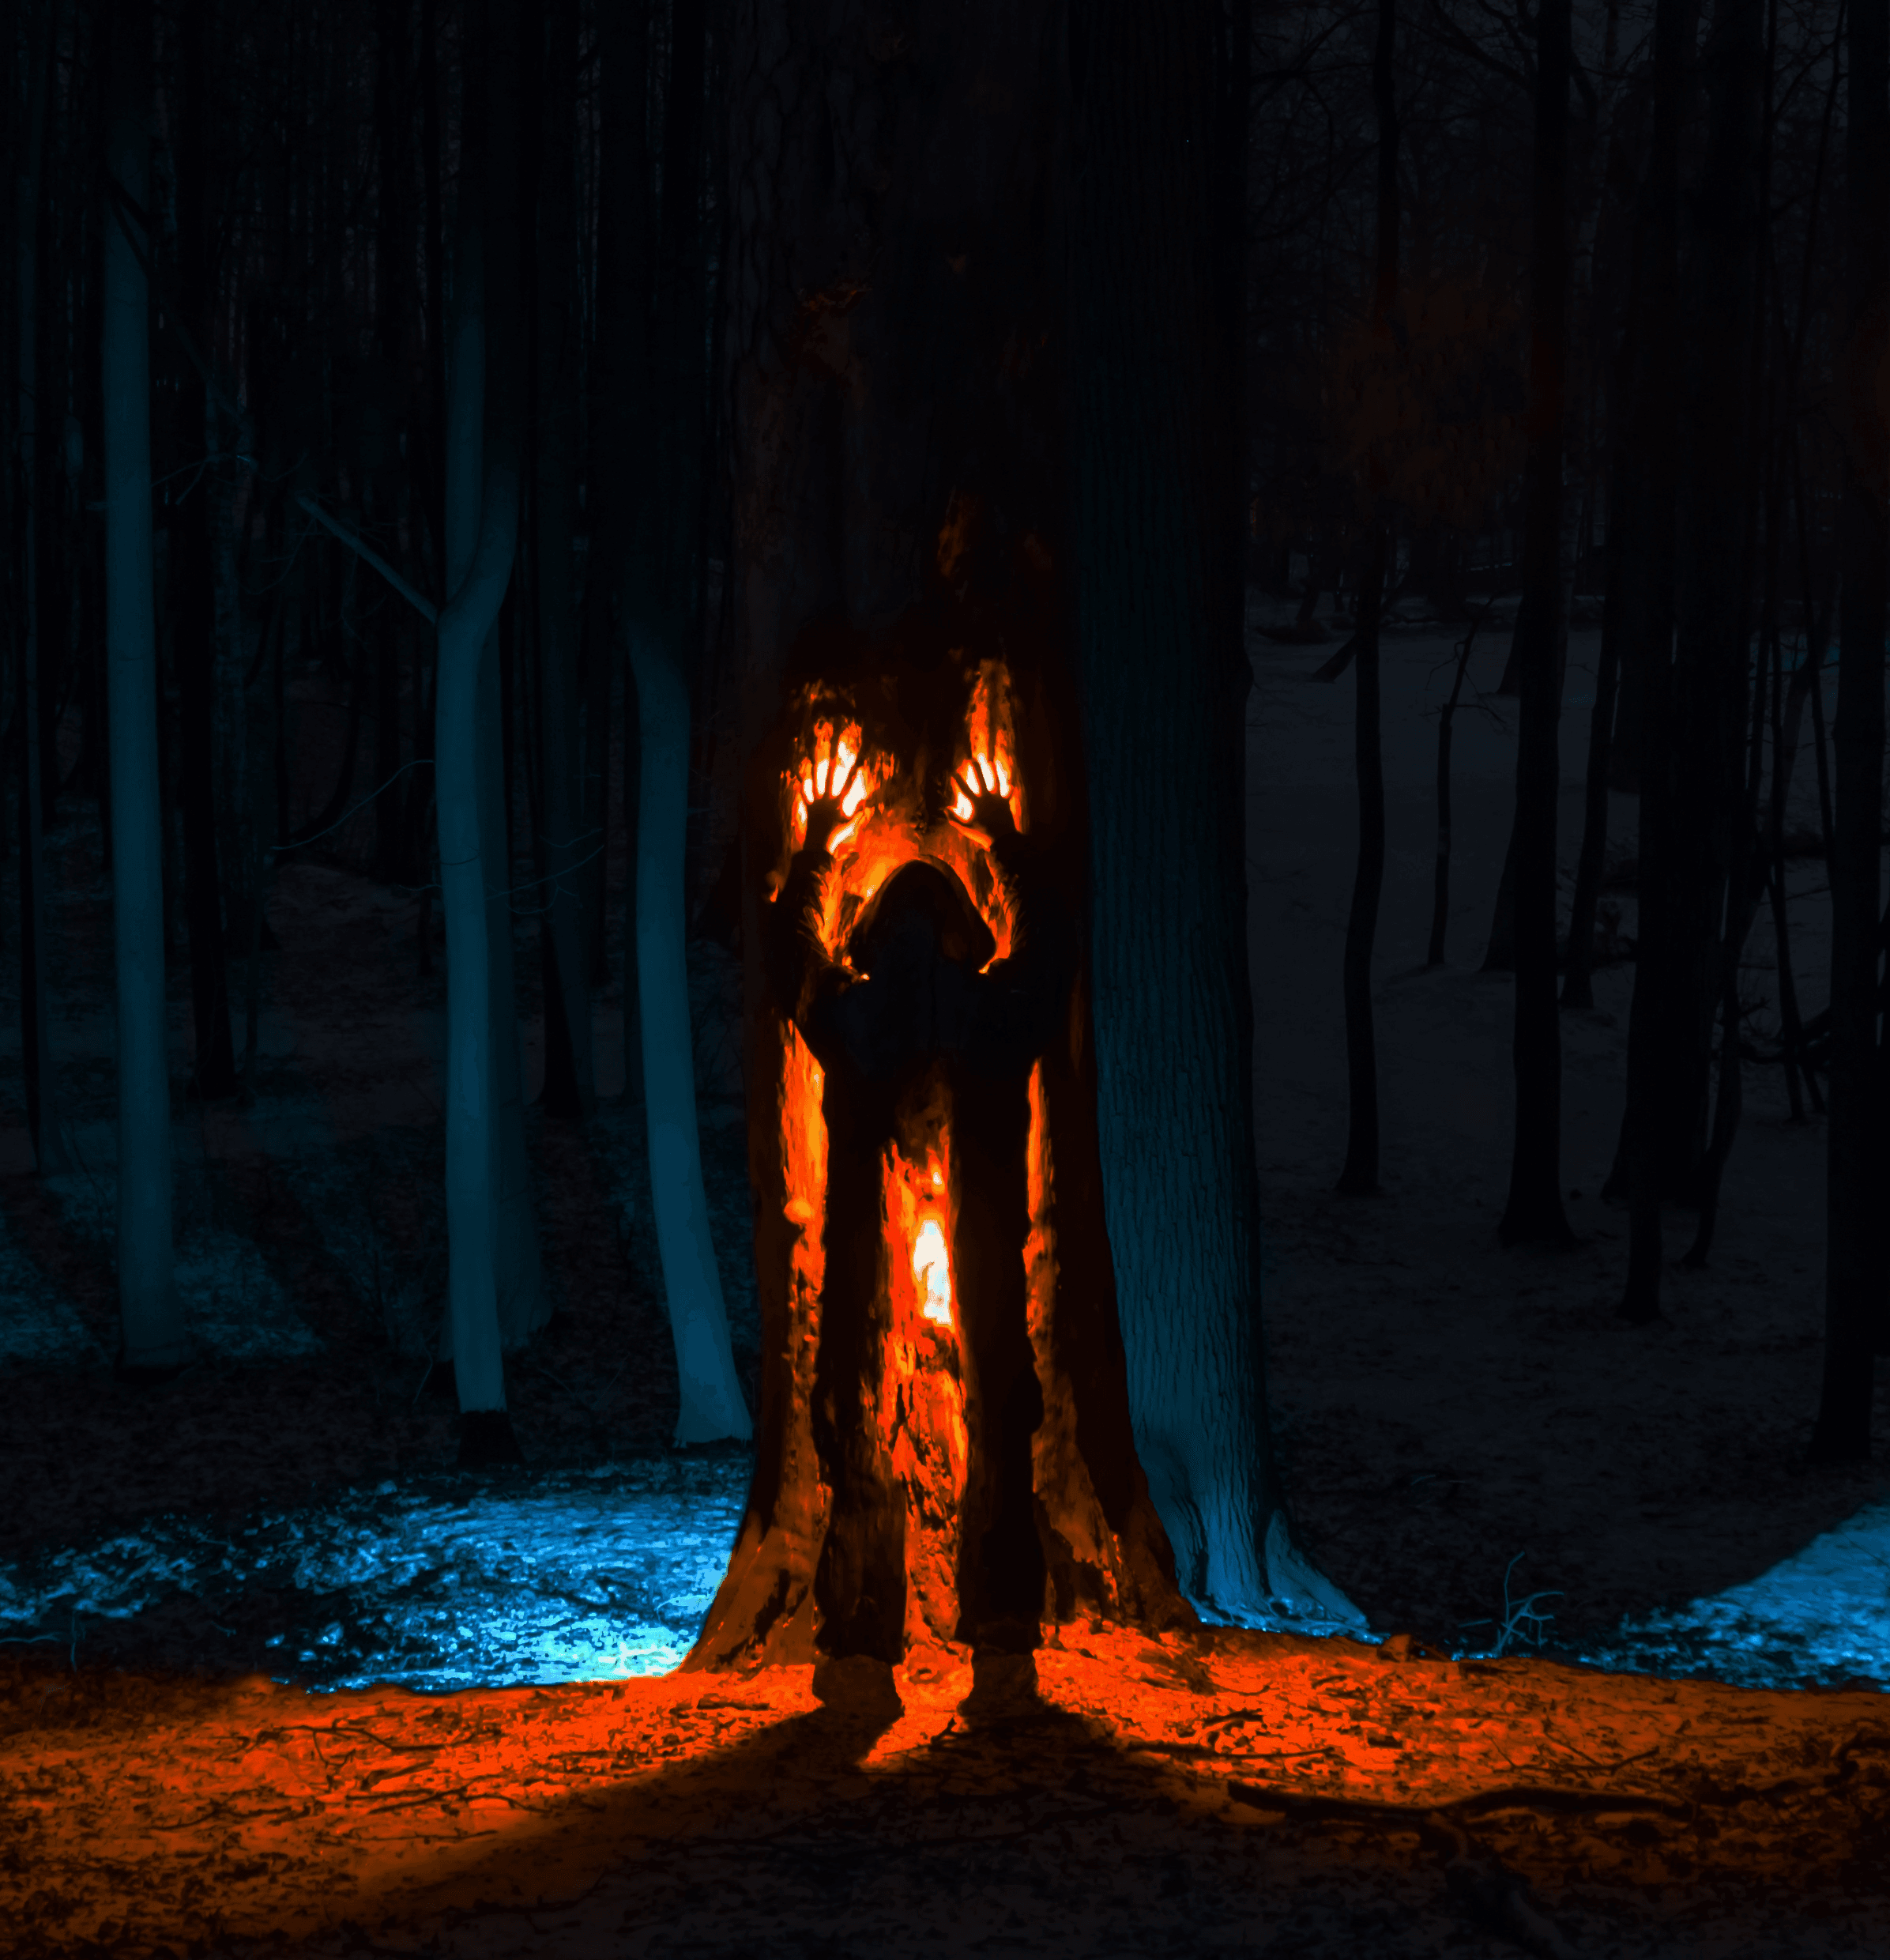 Sacrifice of a burning forest.